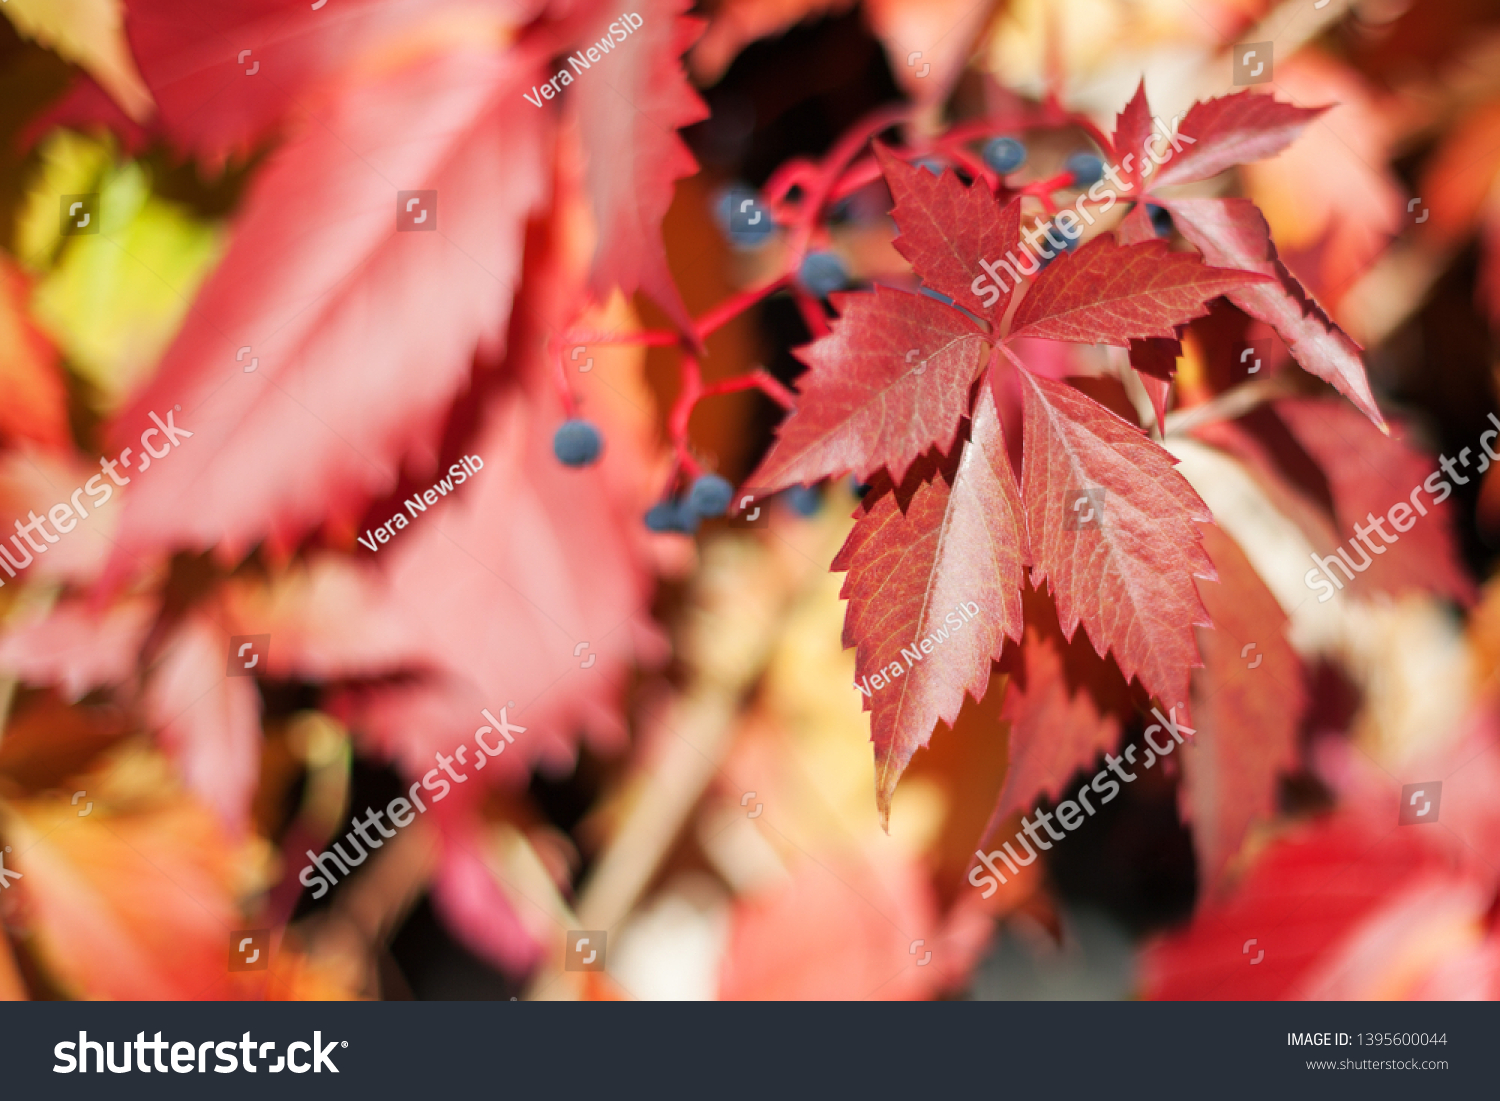 Red girlish grape leaves on blurred background close up, colorful autumn orange leaves, fall season yellow foliage, autumnal nature design, Parthenocissus, Virginia creeper climber plant, copy space #1395600044